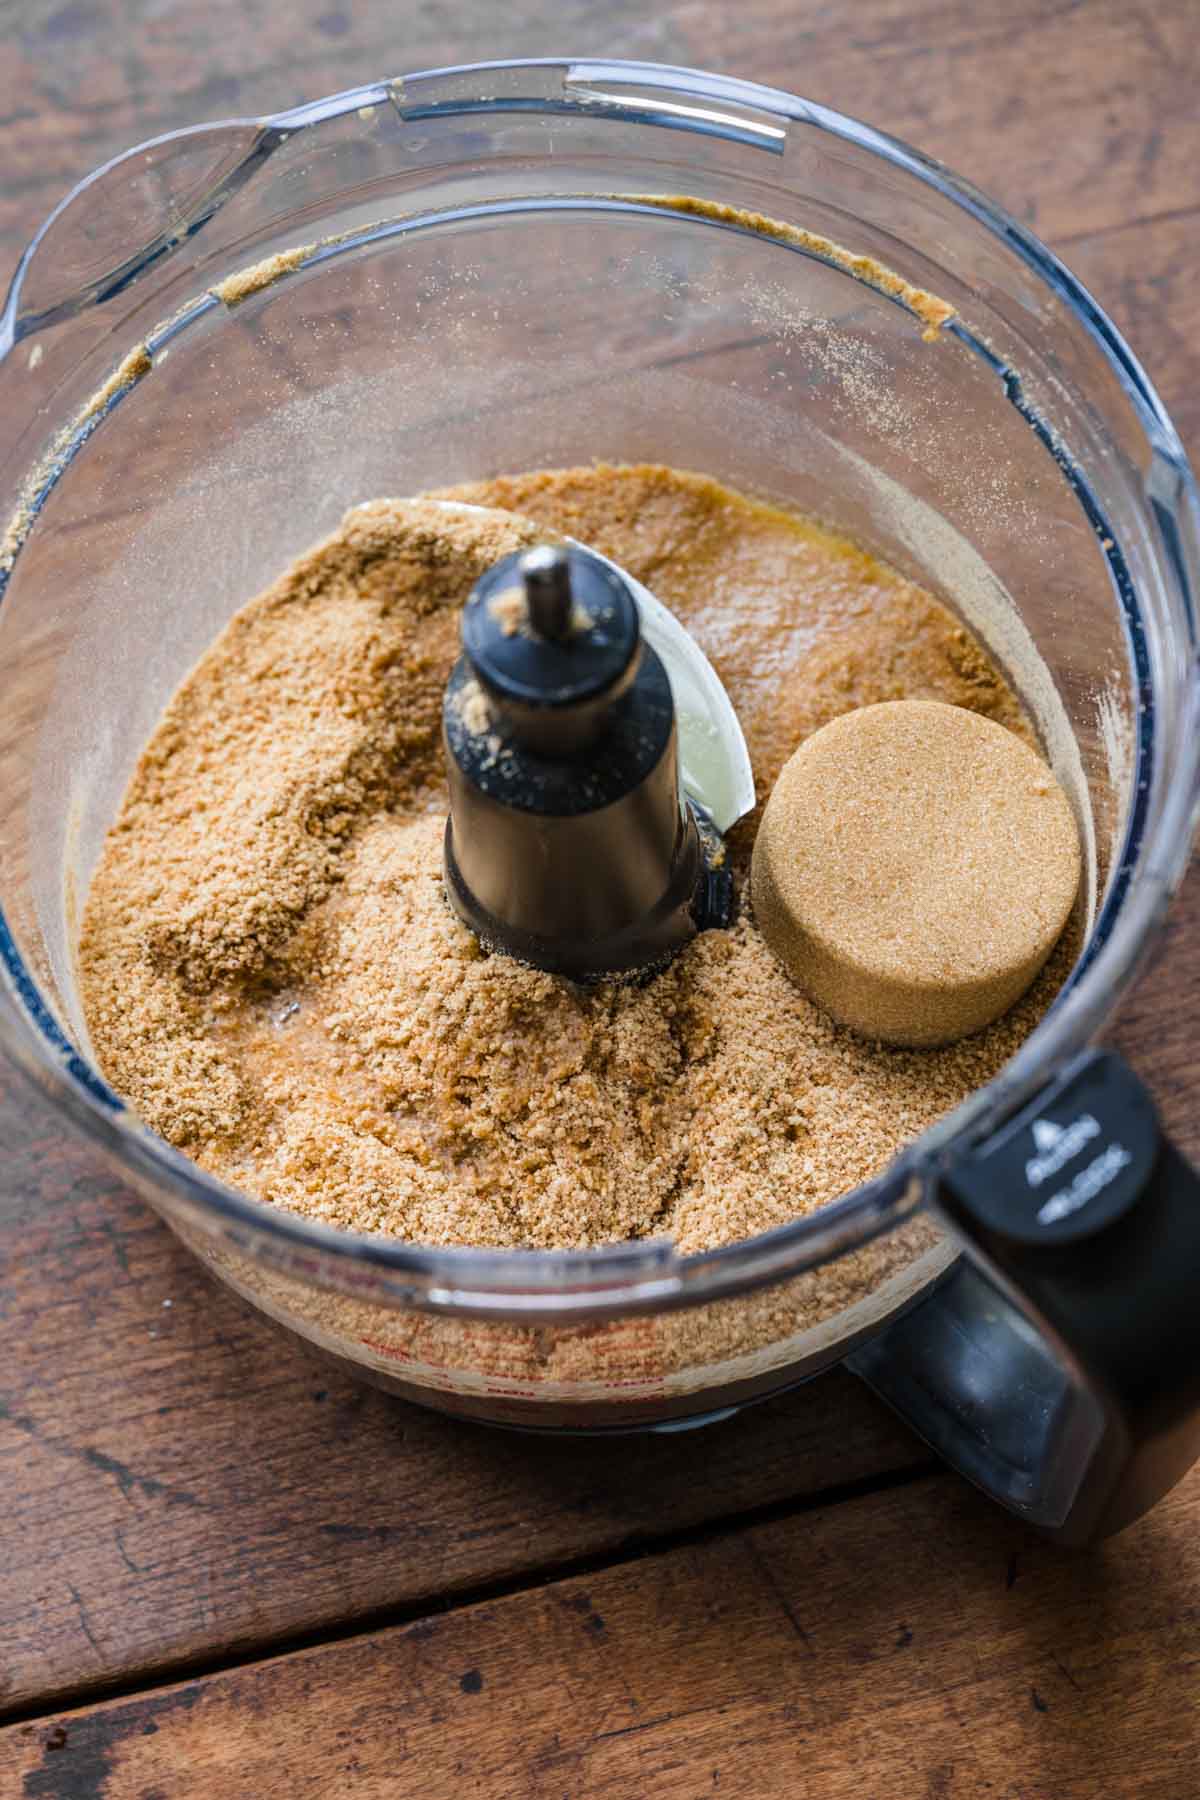 Graham crackers and brown sugar in food processor for No-Bake Cheesecake